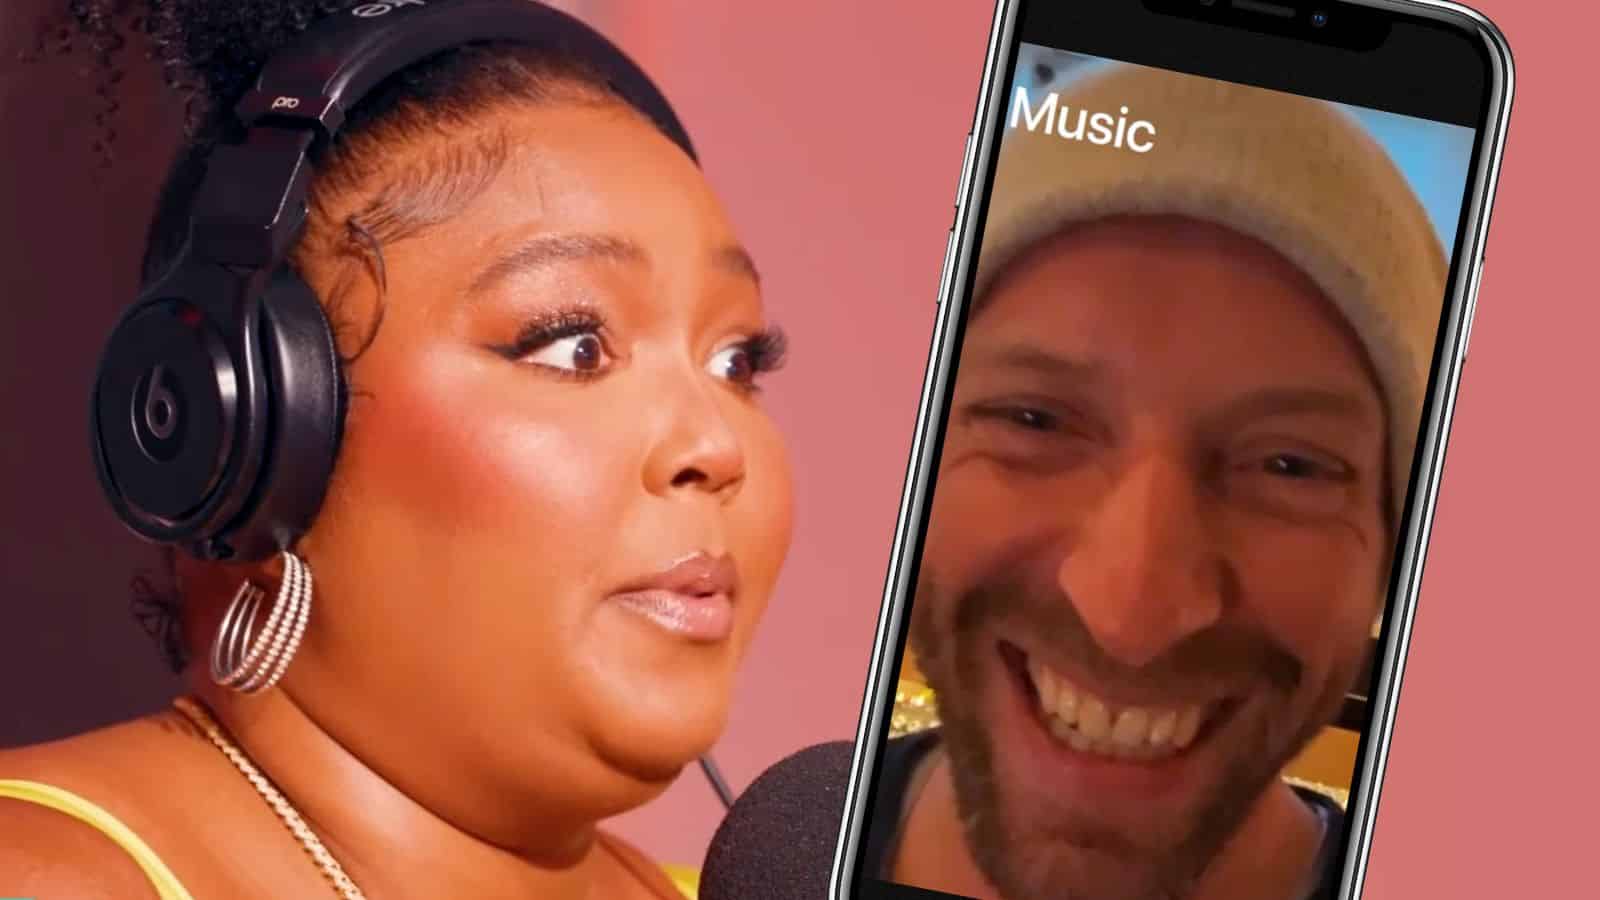 lizzo and coldplay star chris martin